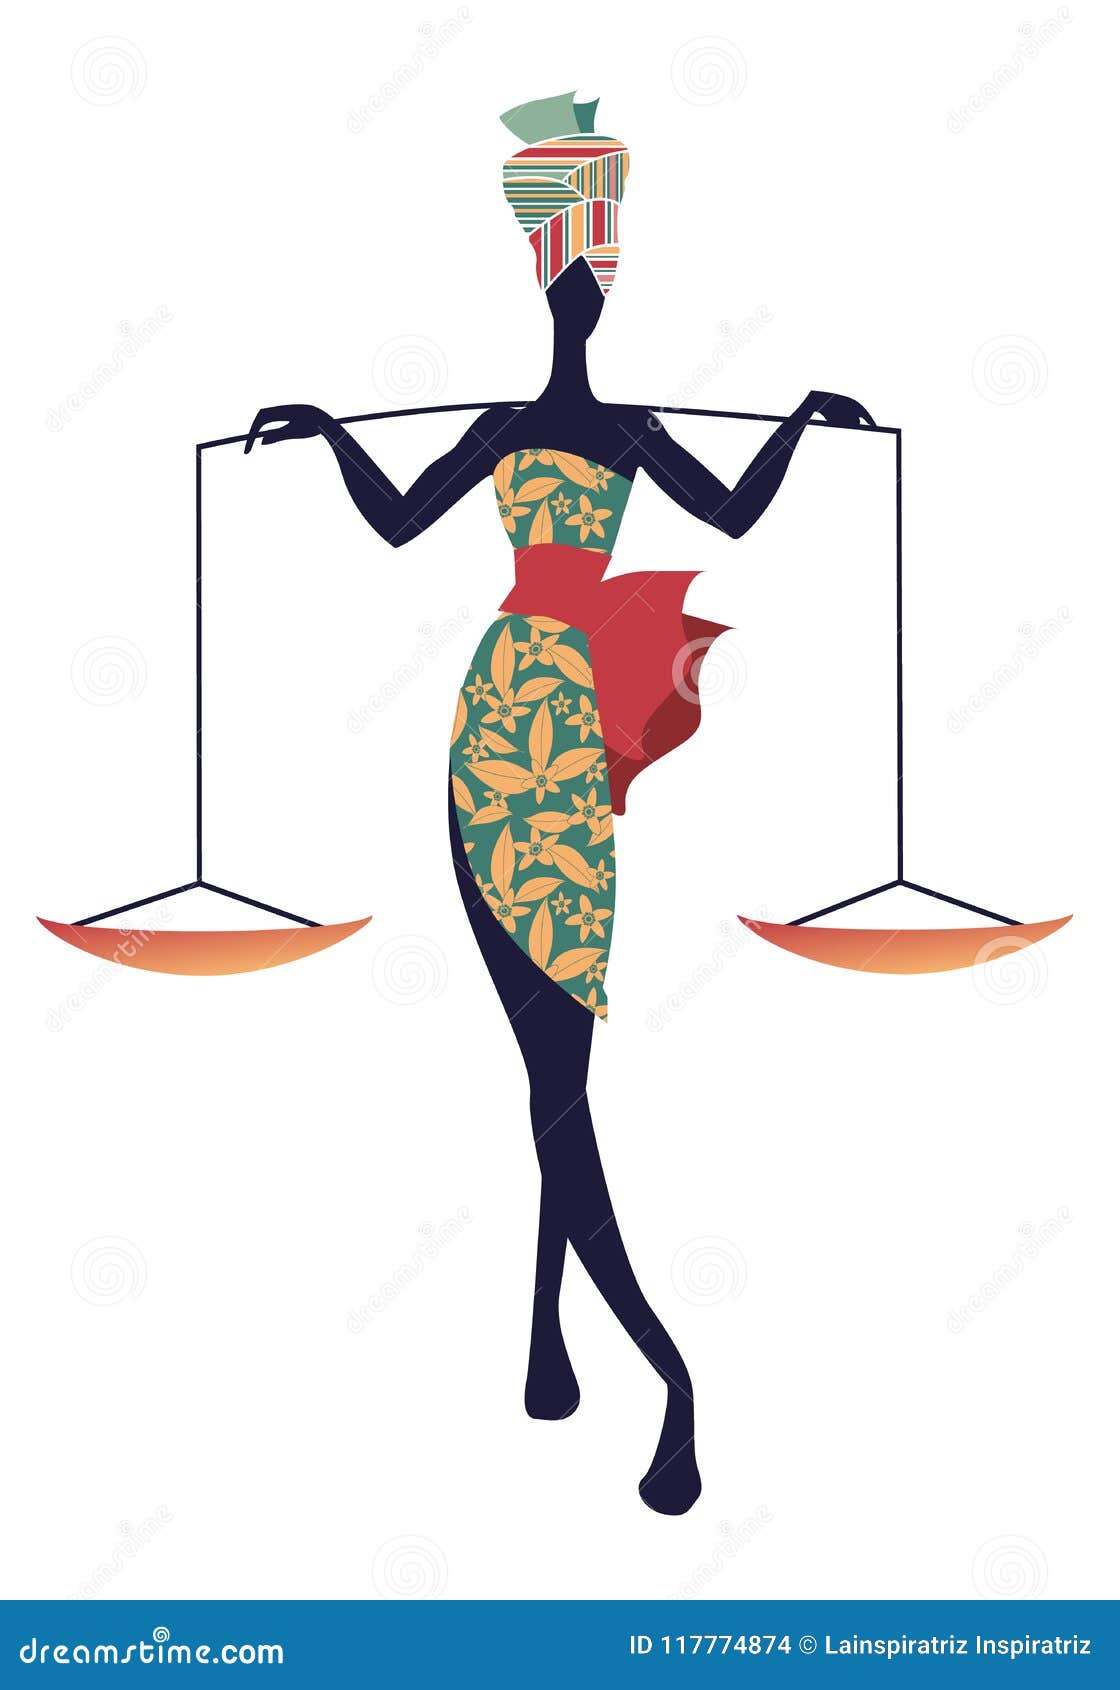 tribal zodiac. libra. elegant woman in floral dress and turban, carrying a scale on her shoulders